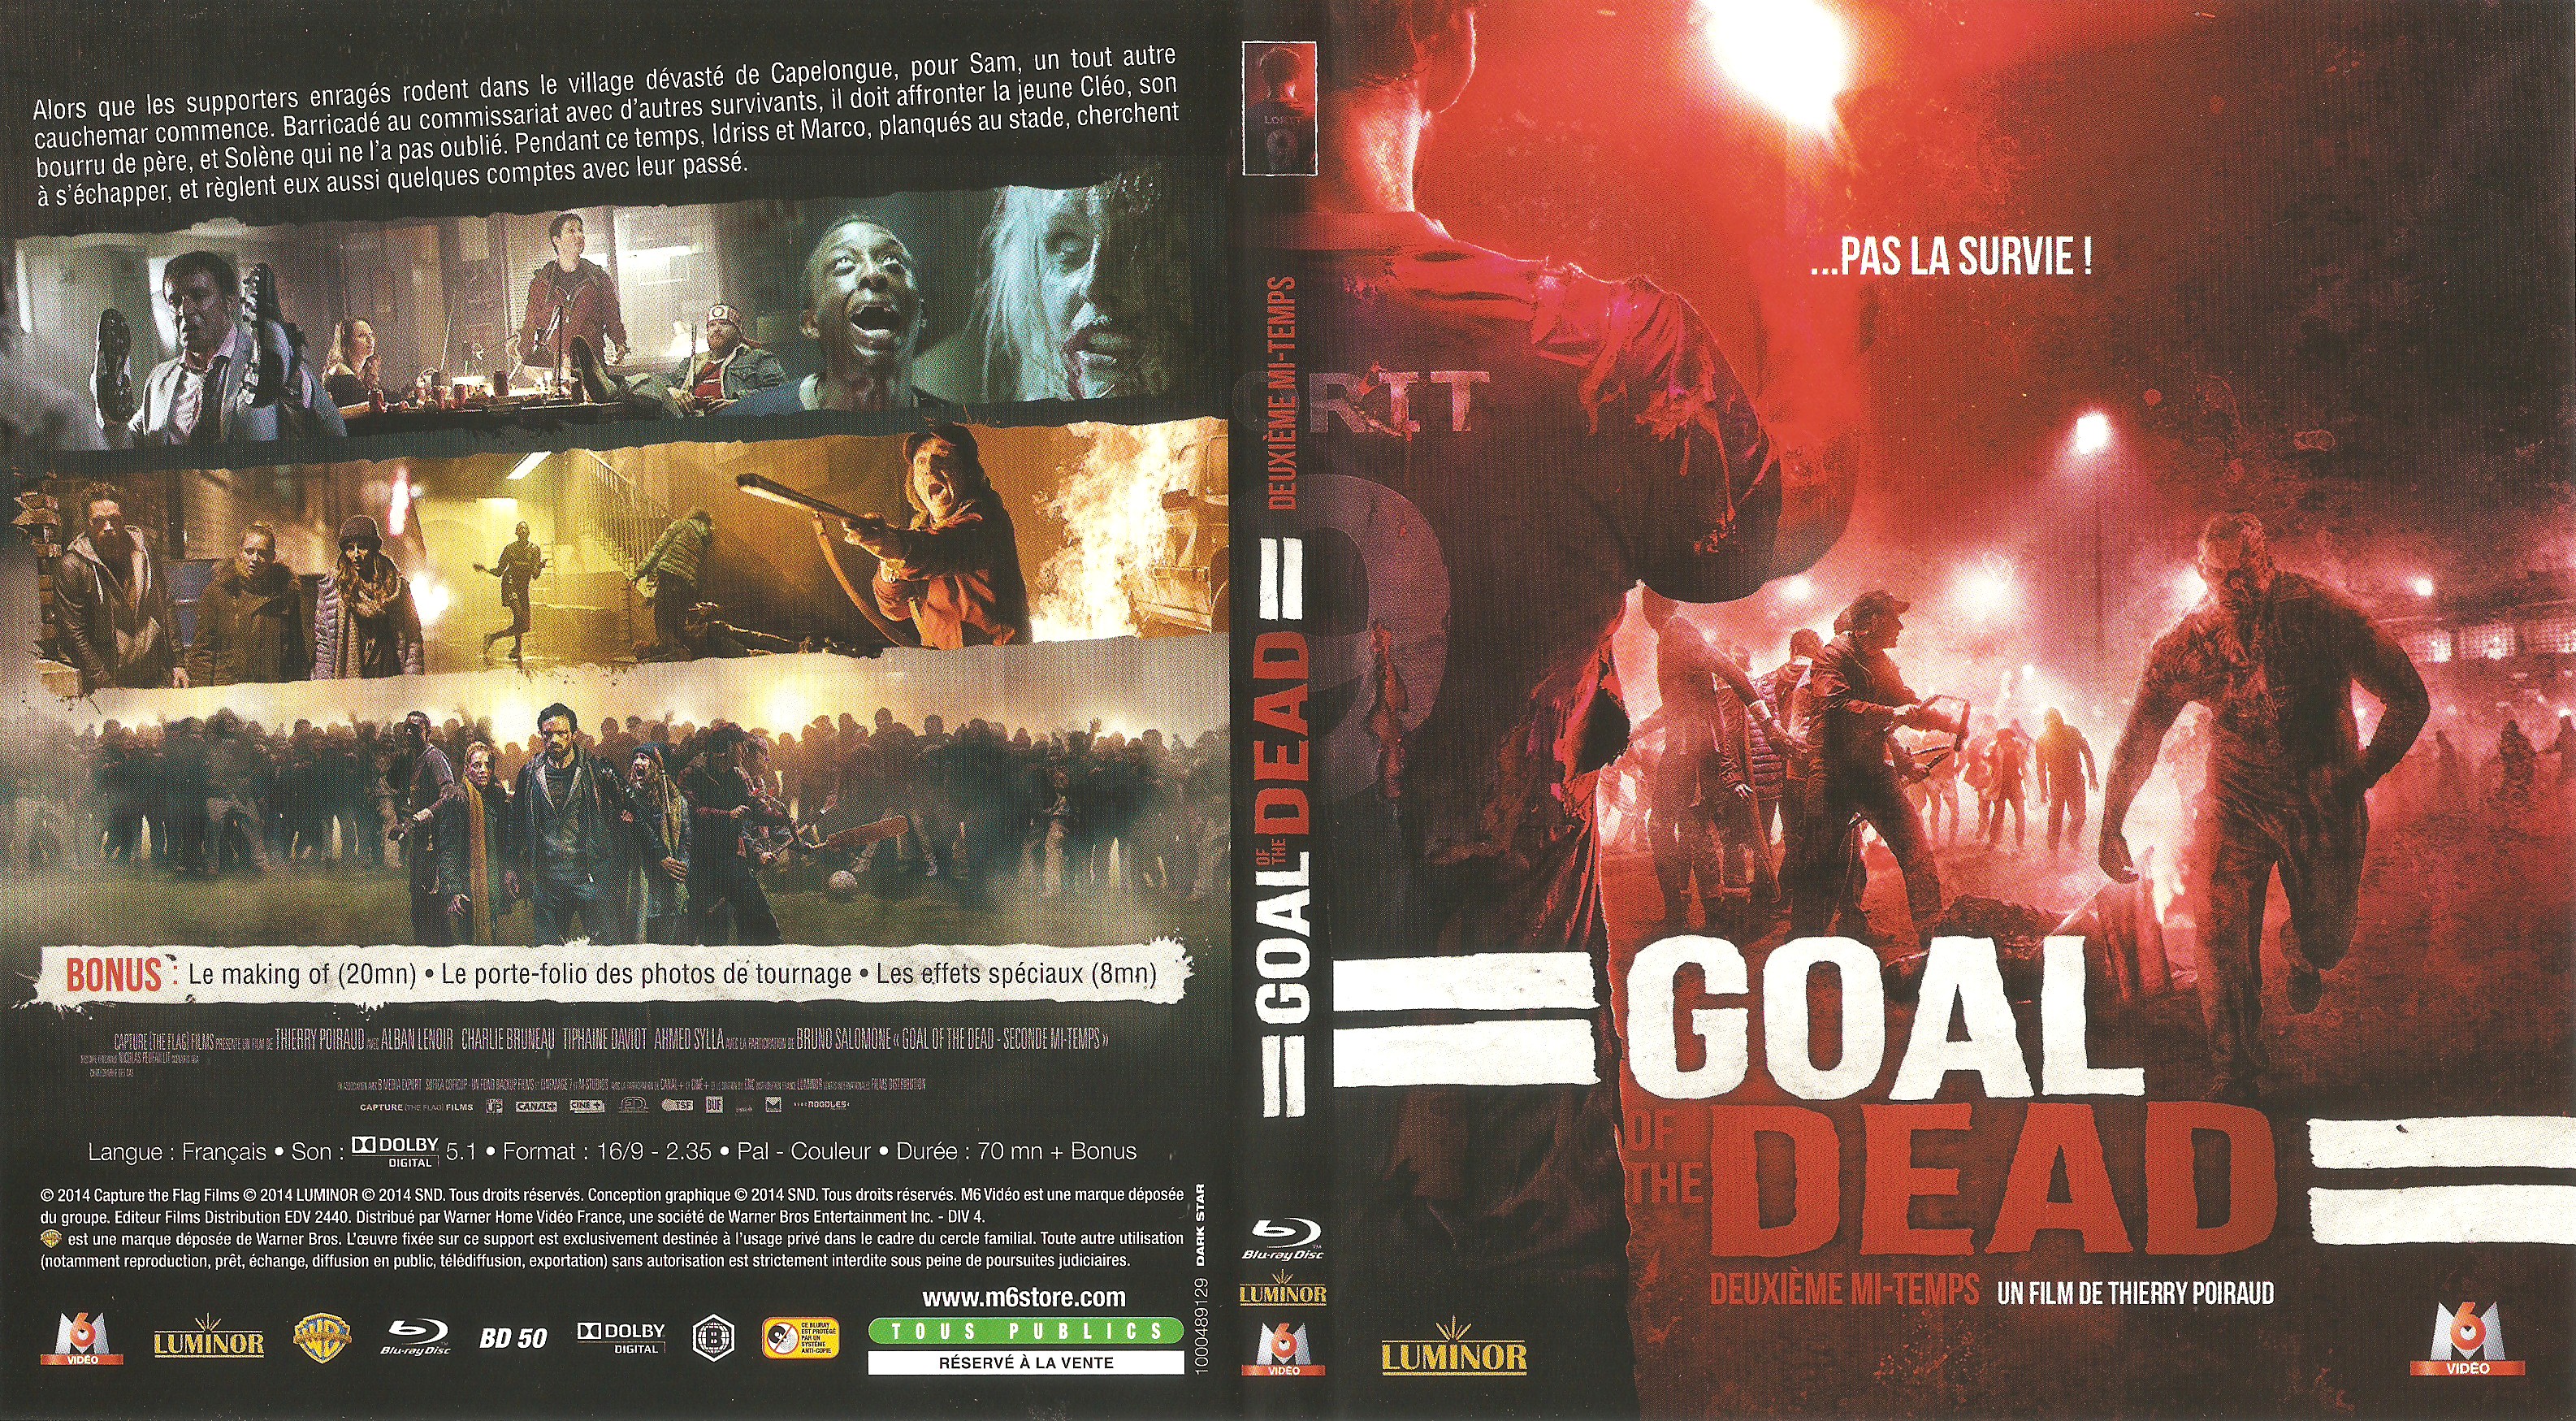 Jaquette DVD Goal of the dead Seconde mi-temps (BLU-RAY)